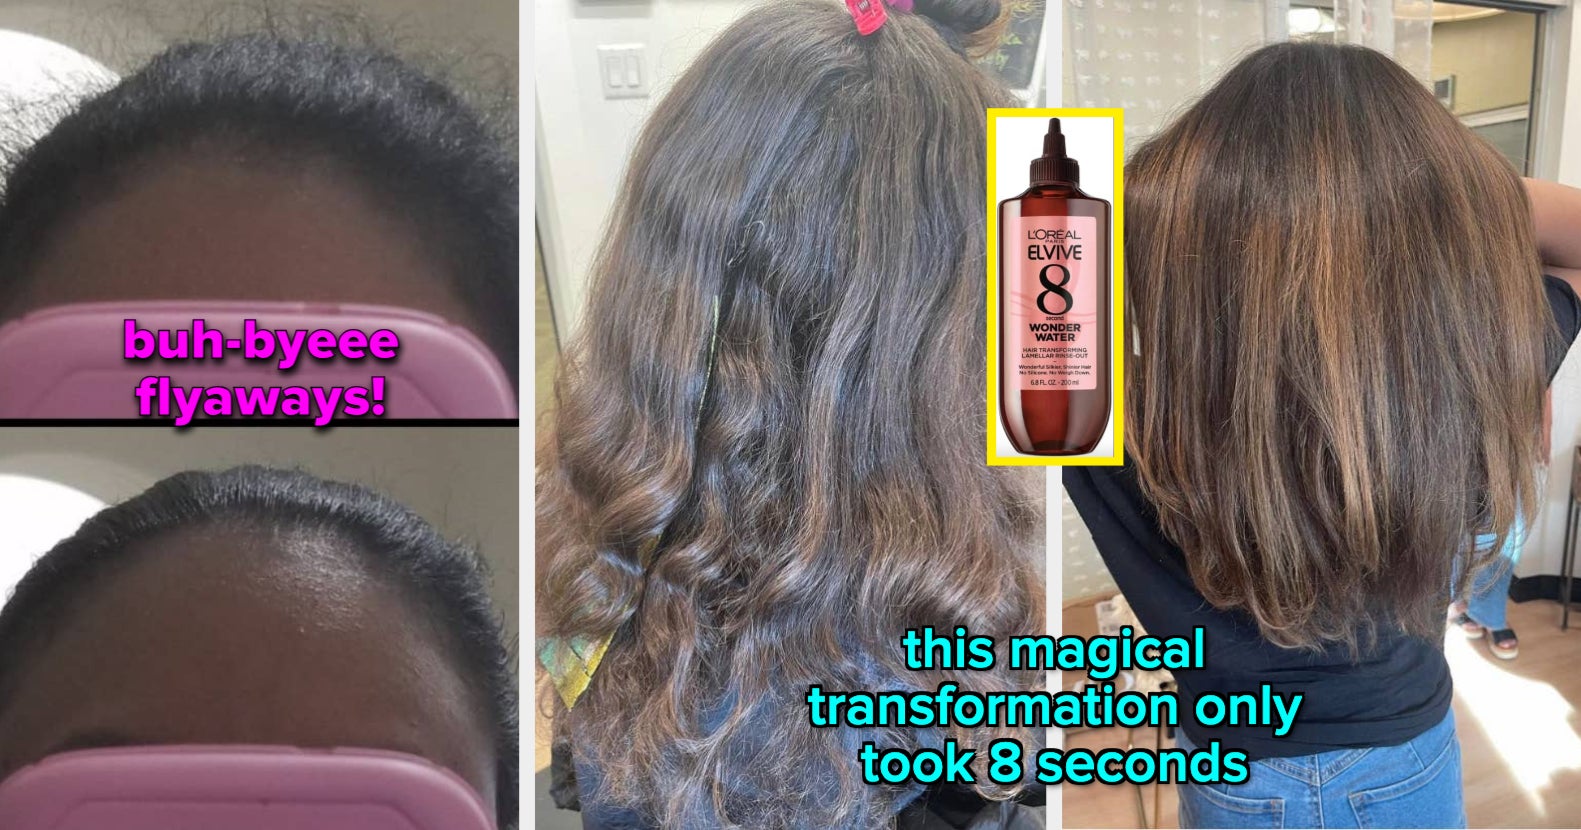 HAIR DAMAGE SUFFERER REVIEWS WONDER WATER  Two WEEK HONEST L'Oreal Elvive  Review BEFORE AND AFTER 